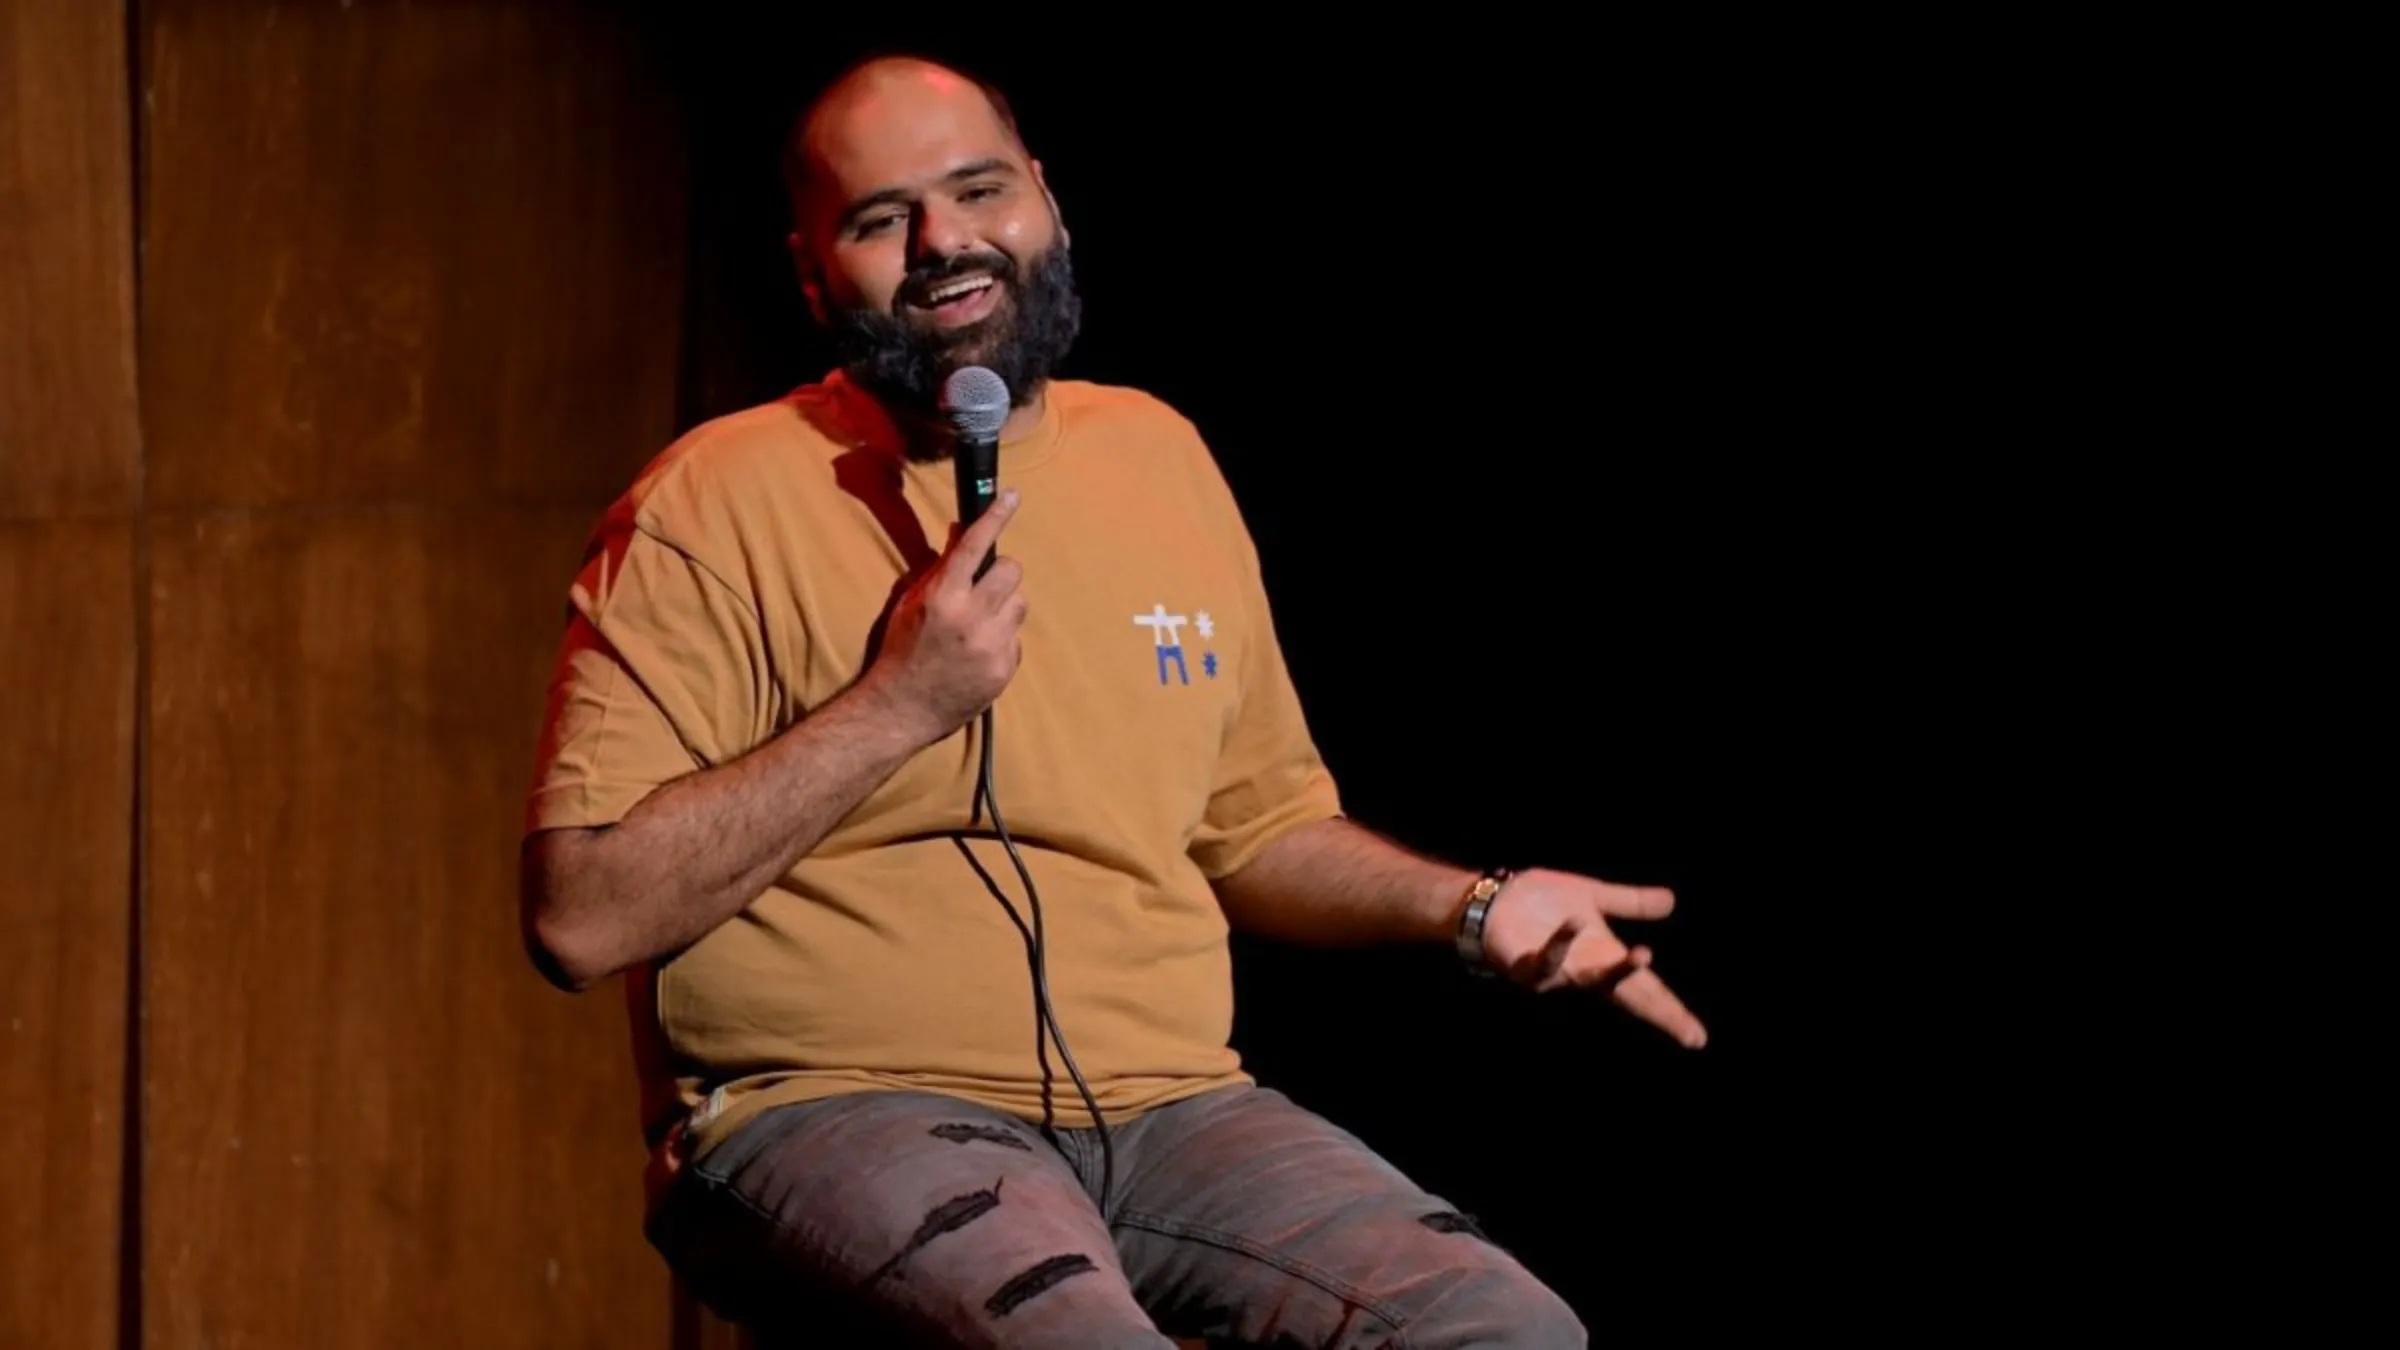 Indian stand-up comedian Kunal Kamra is challenging a new fact-checking rule that he says may lead to his content and social media accounts being blocked